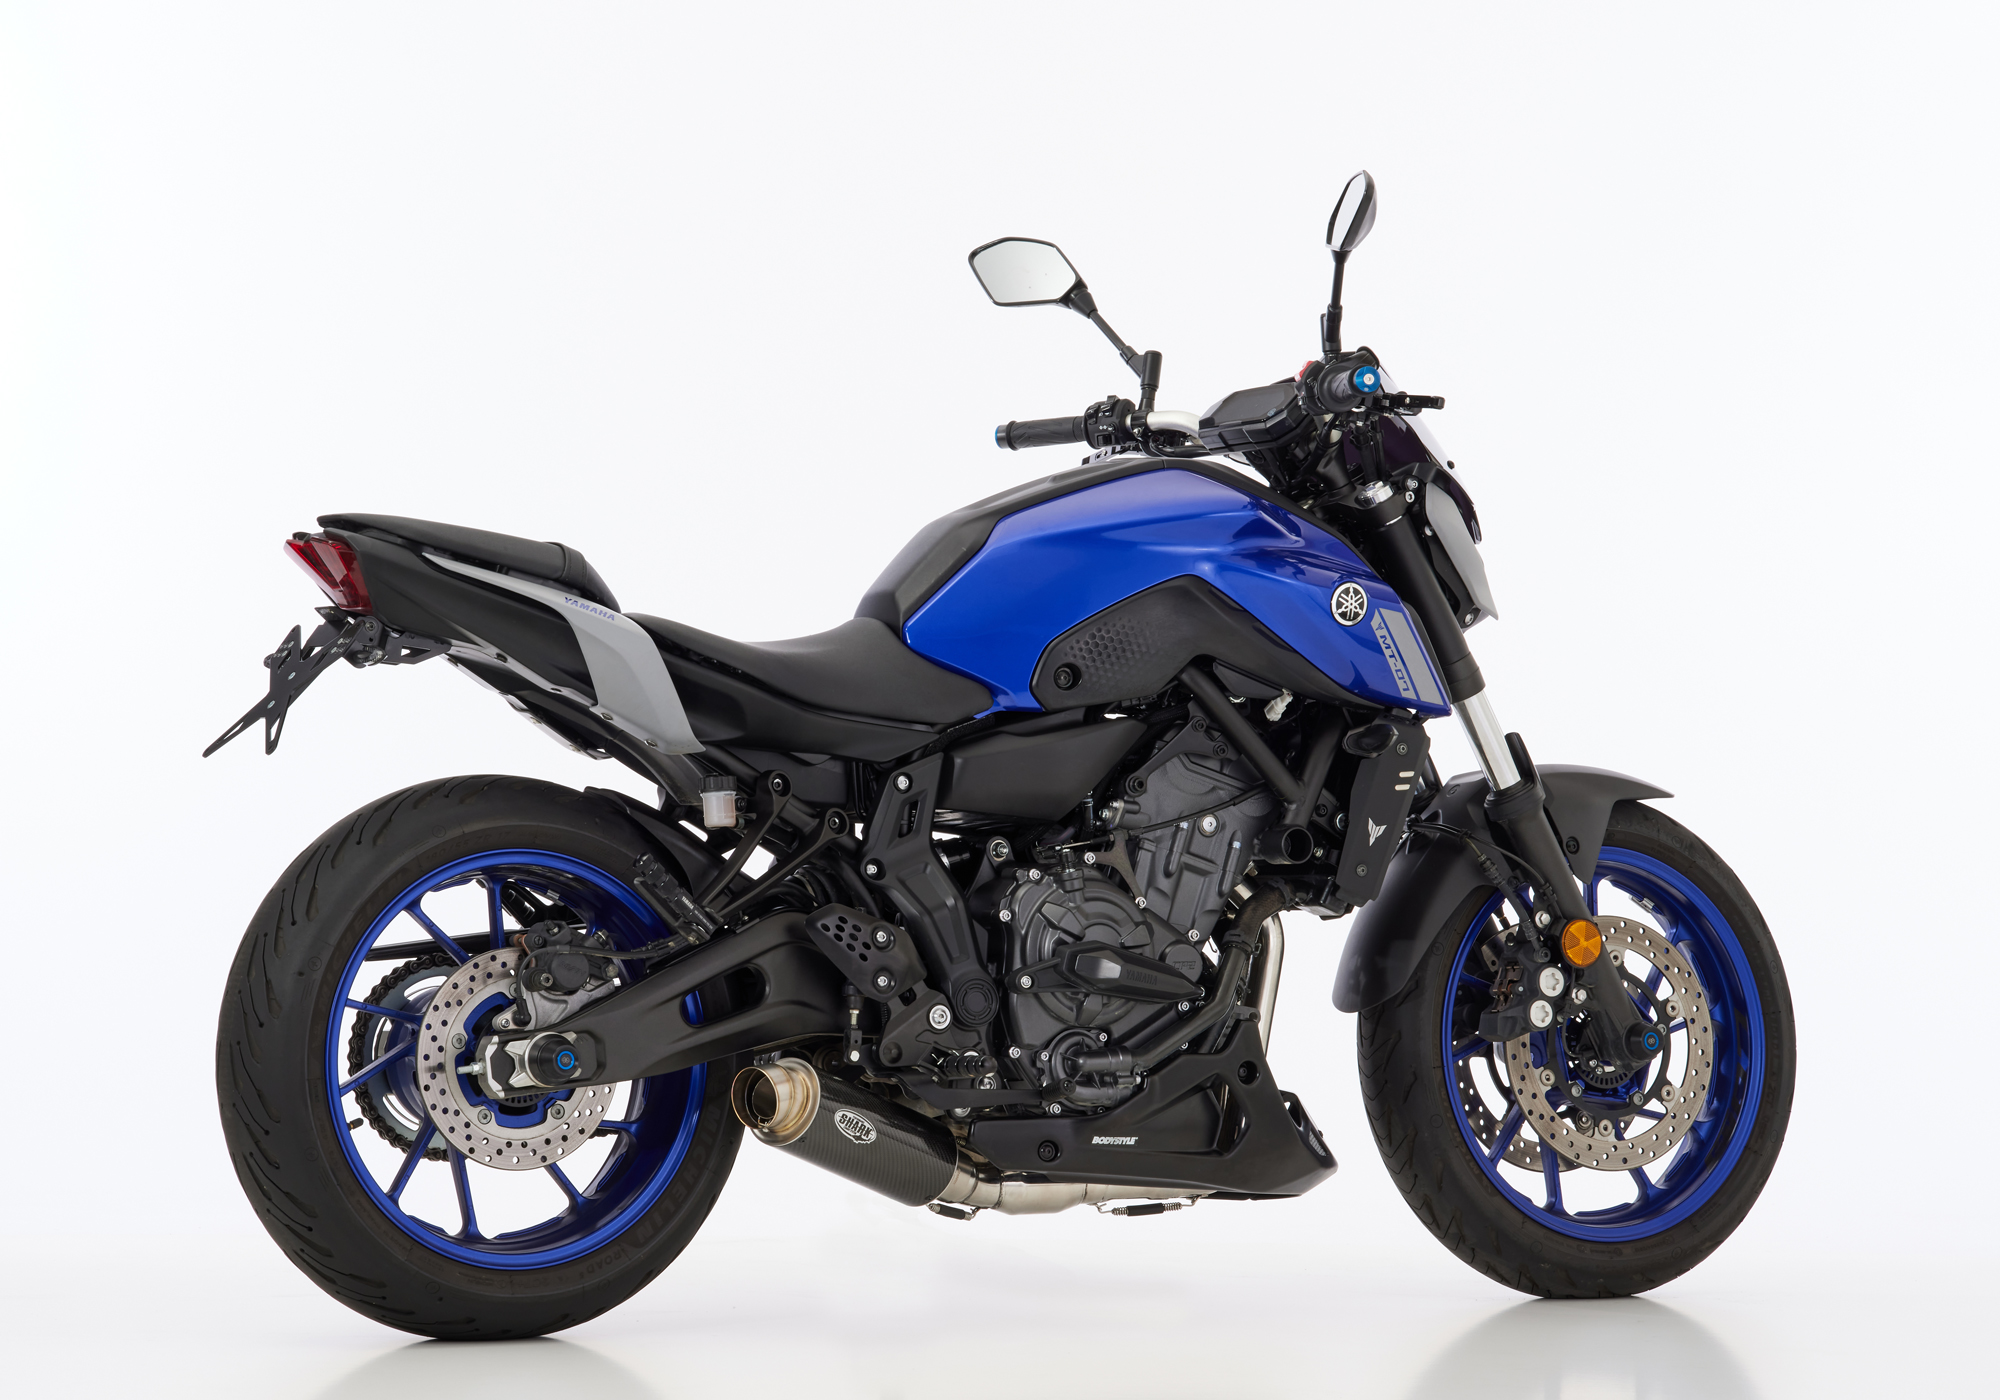 LEOVINCE LV ONE EVO complete exhaust system for YAMAHA MT